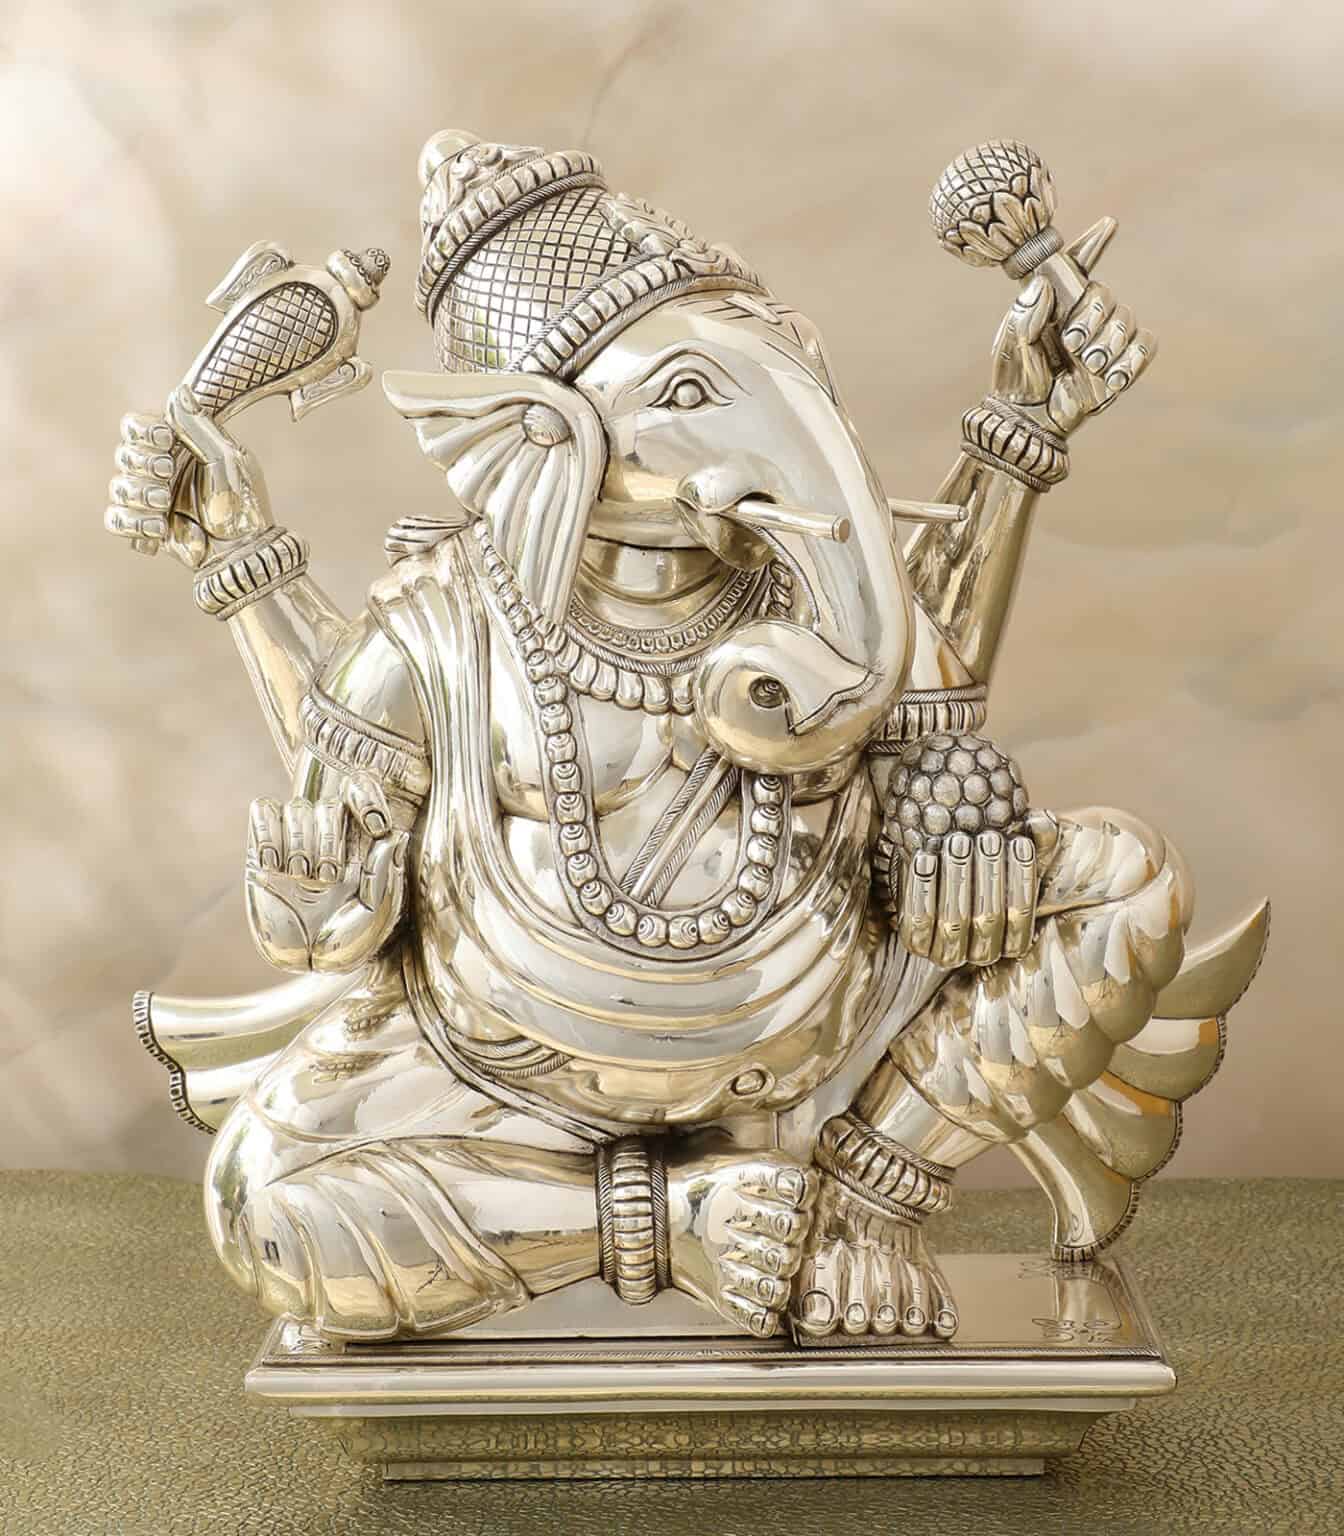 Perfect Silver God Idol of Ganesha with intricate detailing and design.